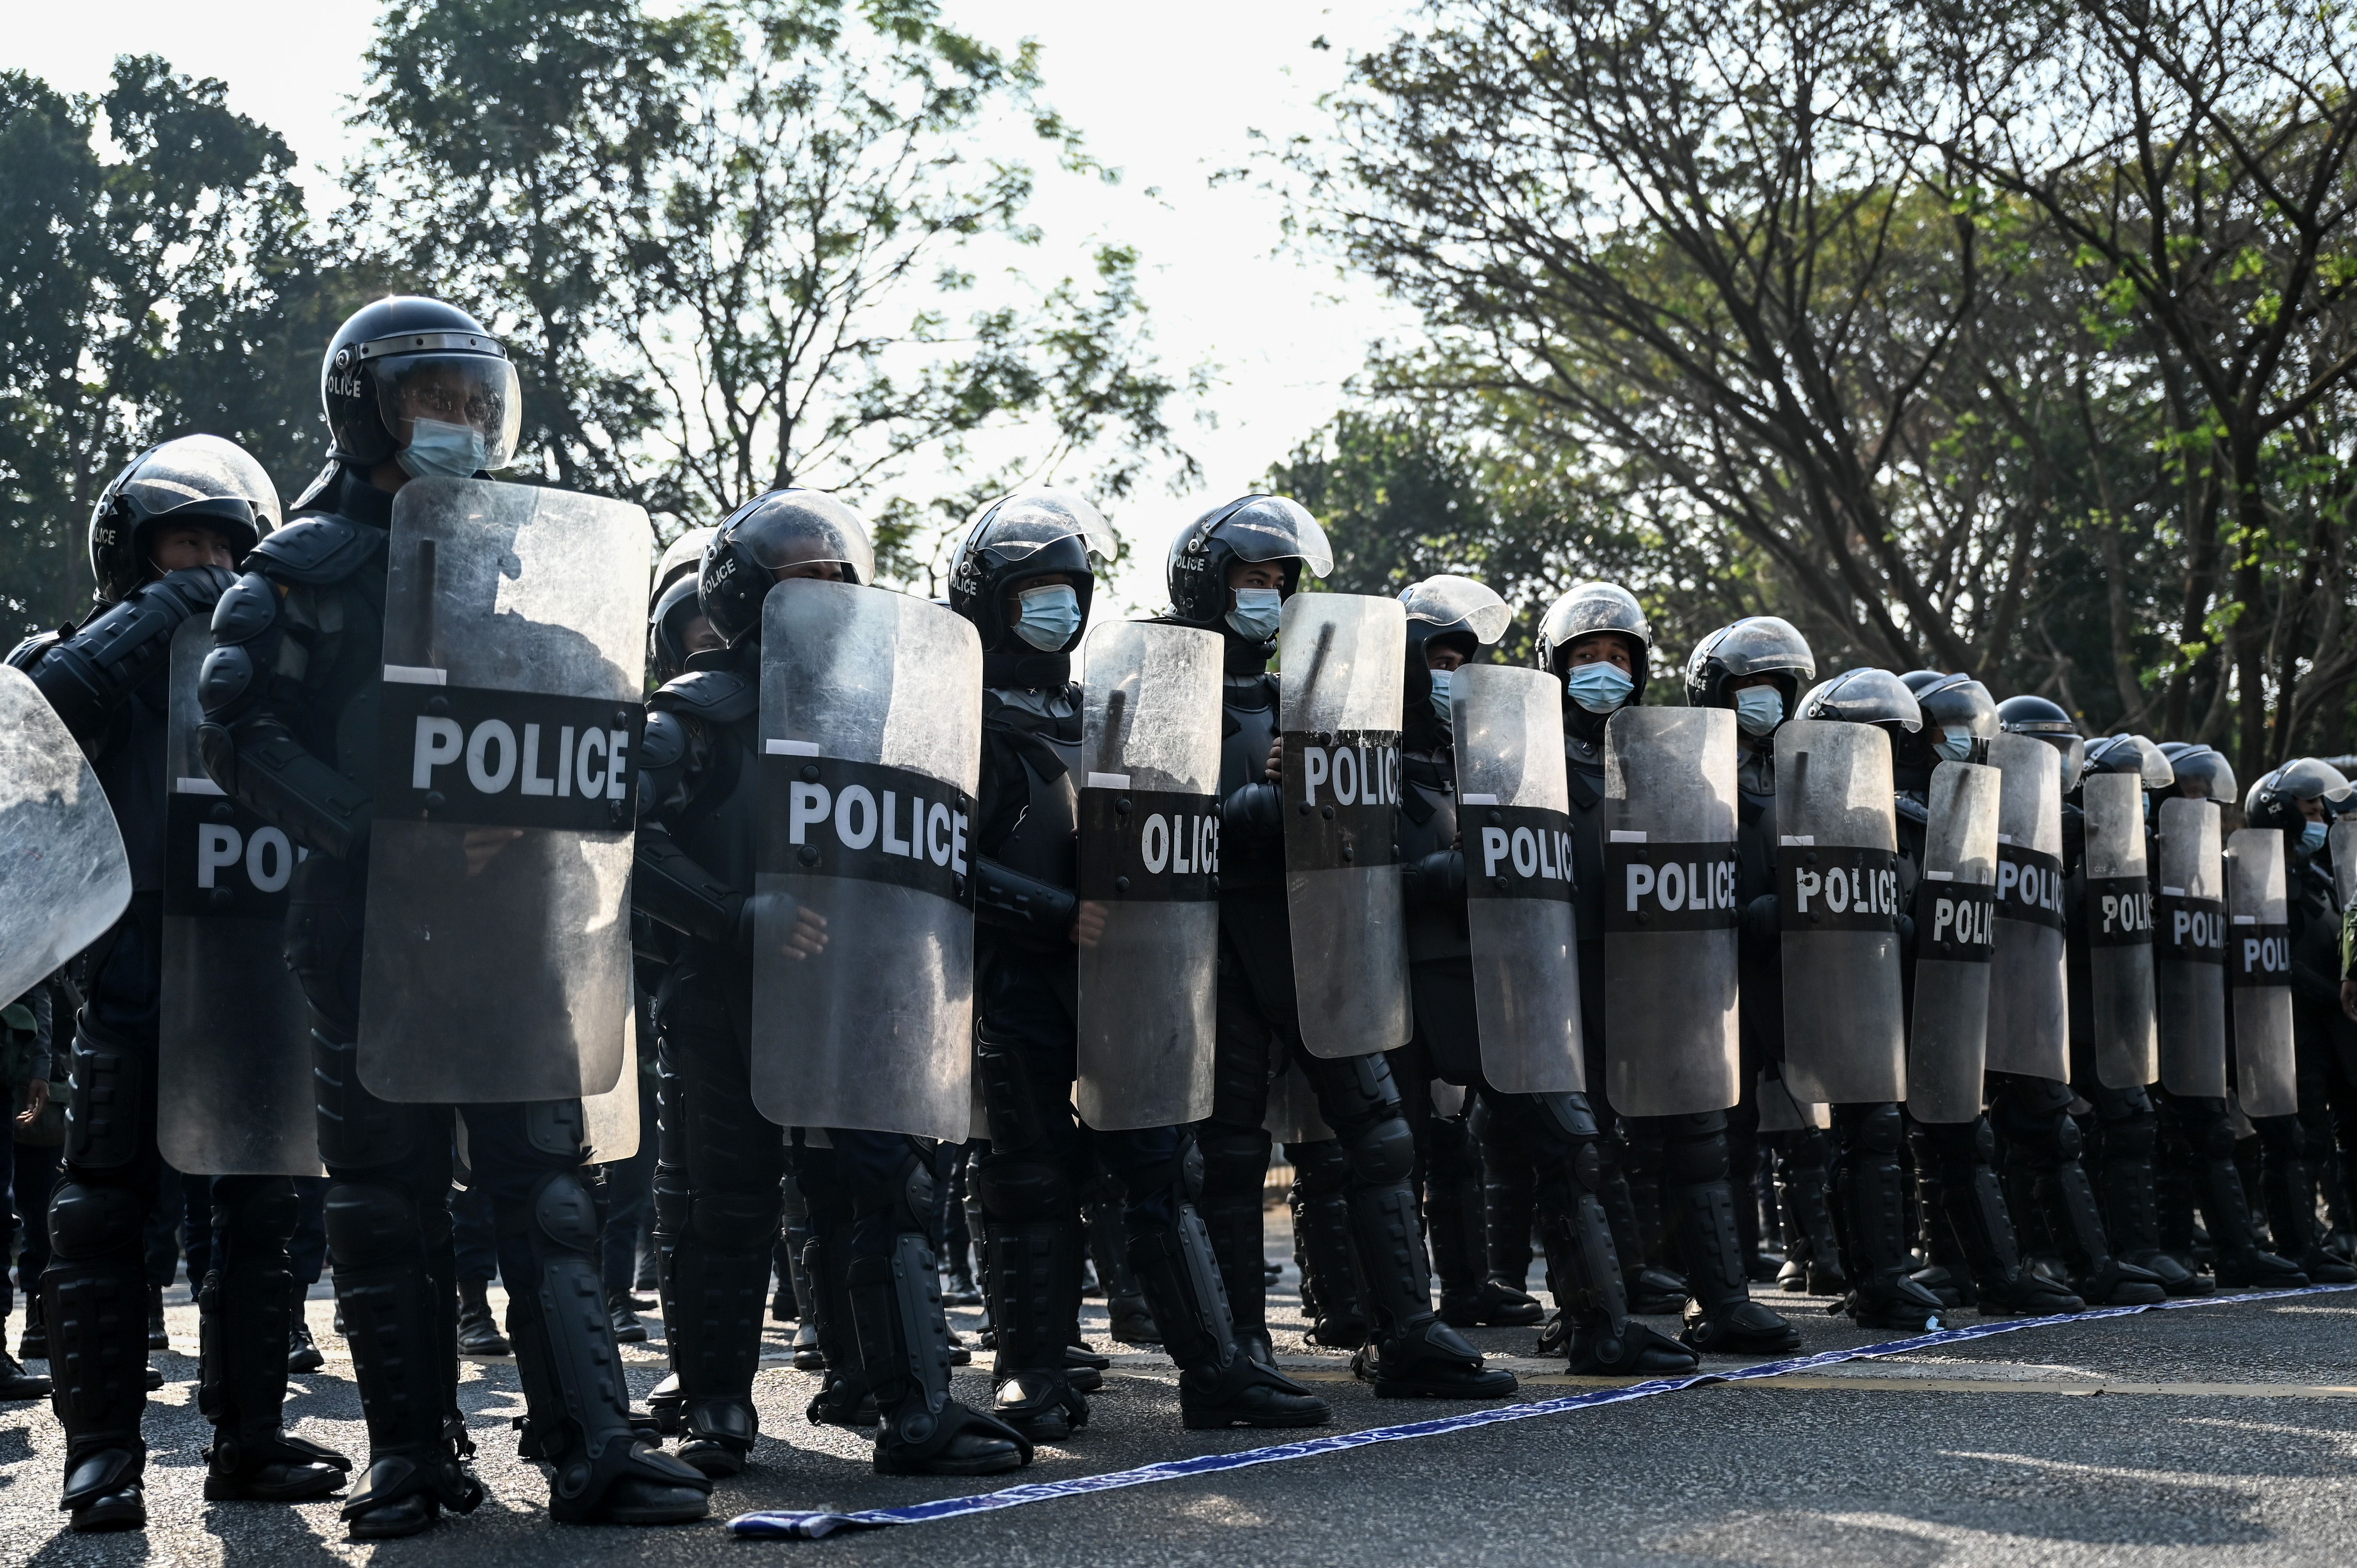 Riot police block the street as protesters hold a demonstration against the military coup in Yangon on February 7